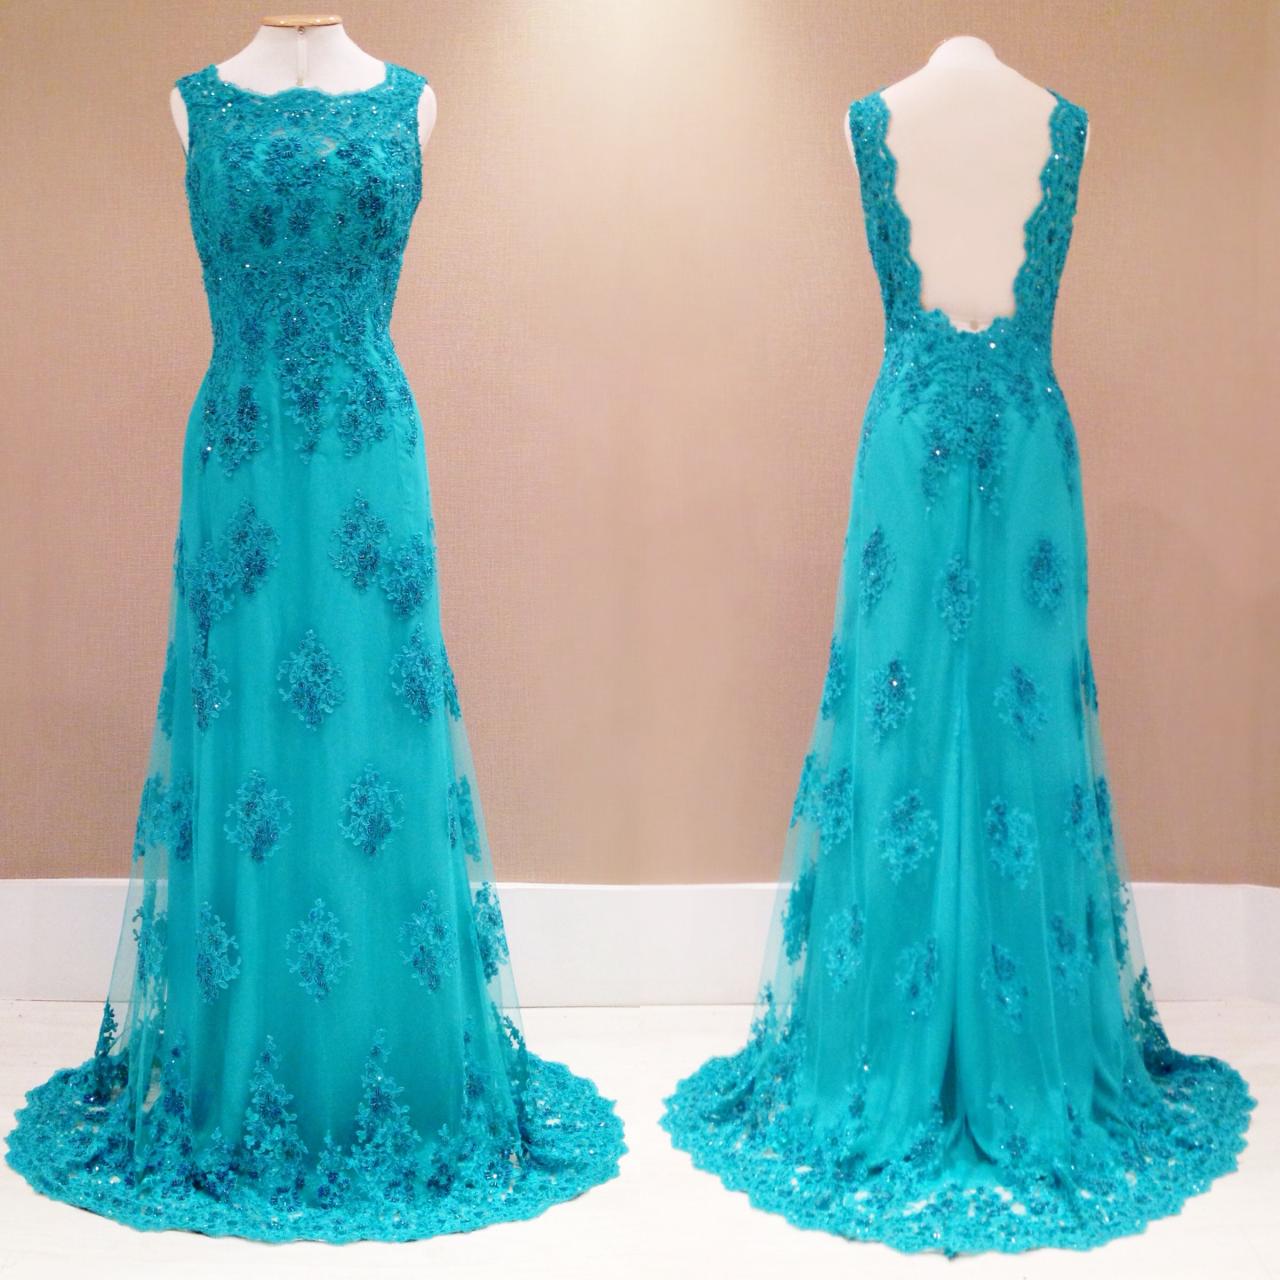 Lace Prom Dresses,blue Prom Dress,modest Prom Gown,a Line Prom Gown,evening Dress,backless Evening Gowns,party Gowns